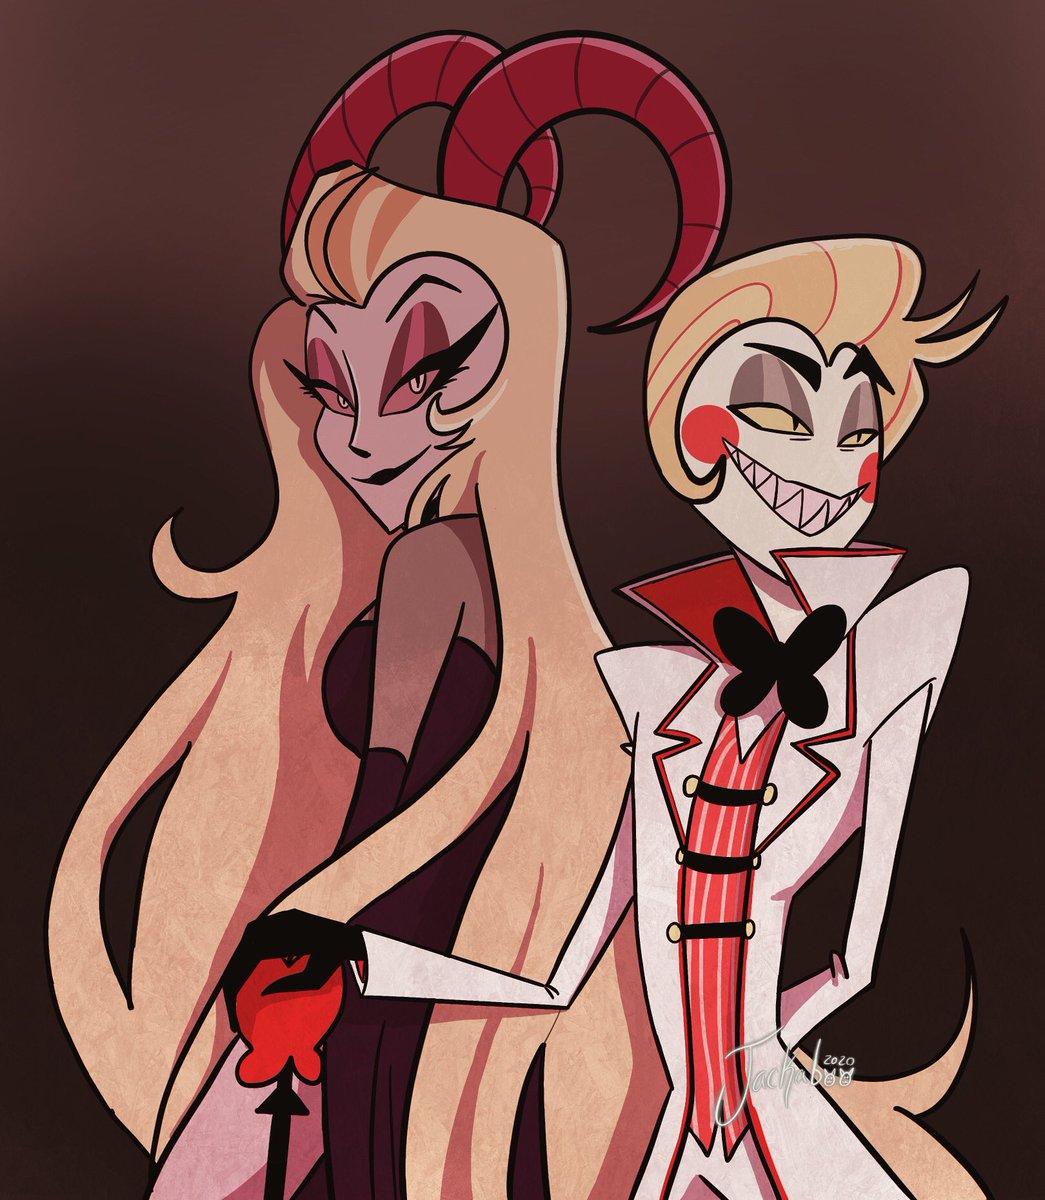 Decided to line and color some practice sketches of these beauties. Gonna work on a legit piece of them soon 

#hazbinhotel #luciferhazbinhotel #lilithhazbinhotel